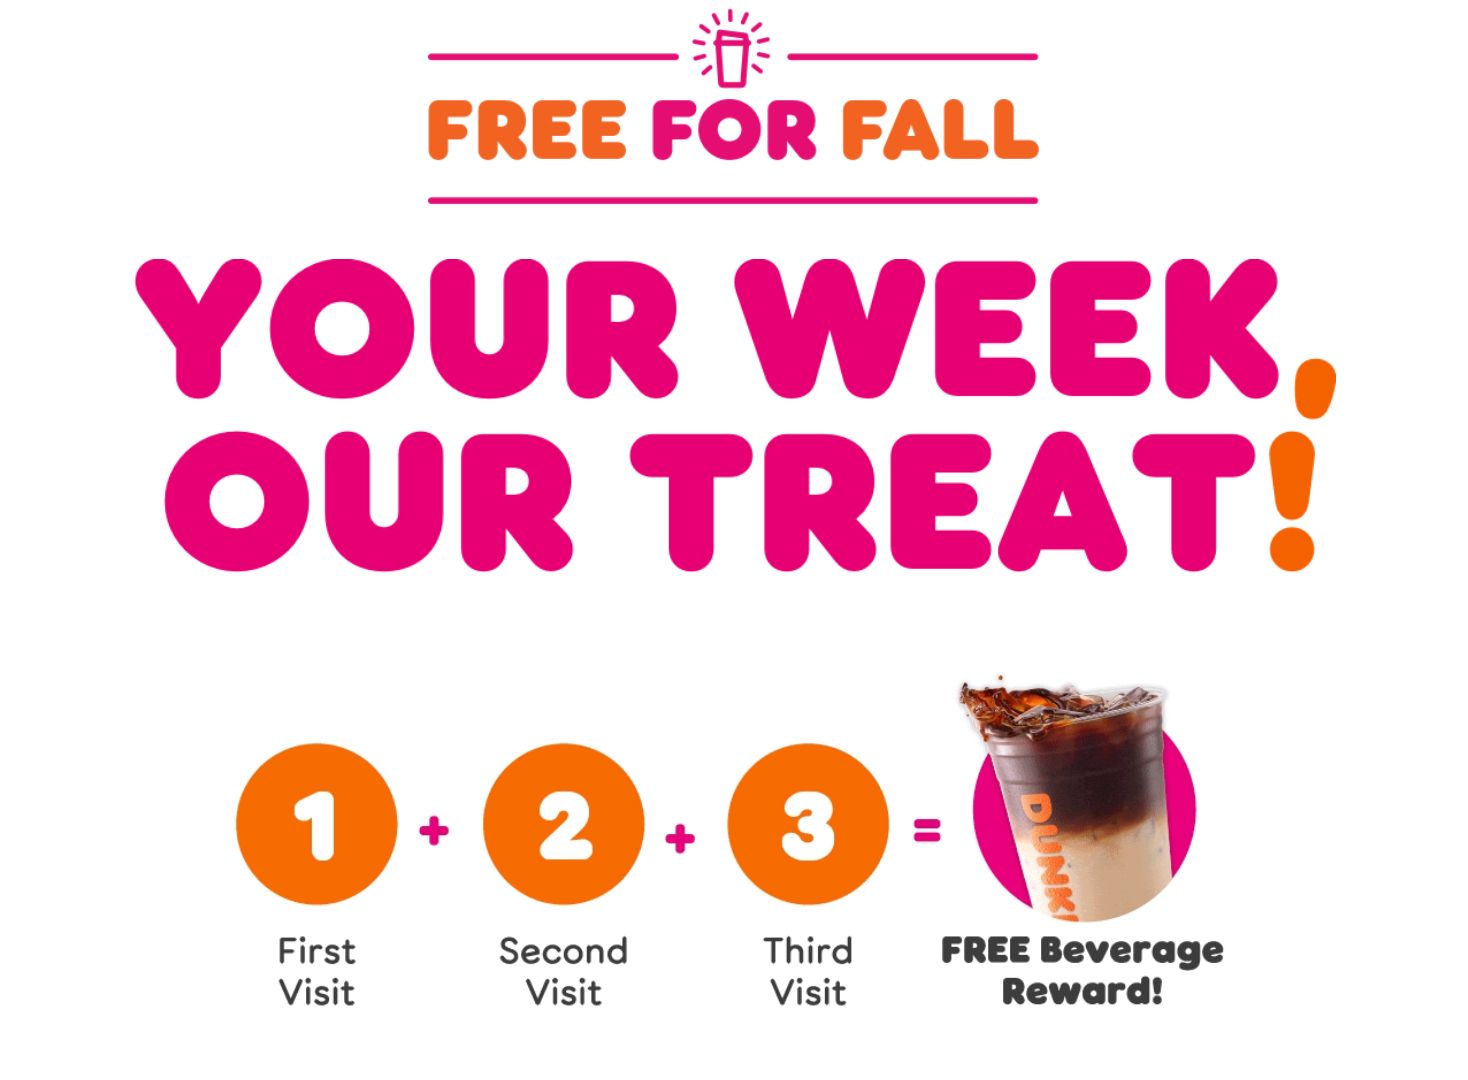 DD Perks Members Can Earn a Free Drink with 3 Qualifying Purchases in a Week at Dunkin' Donuts Through to October 3